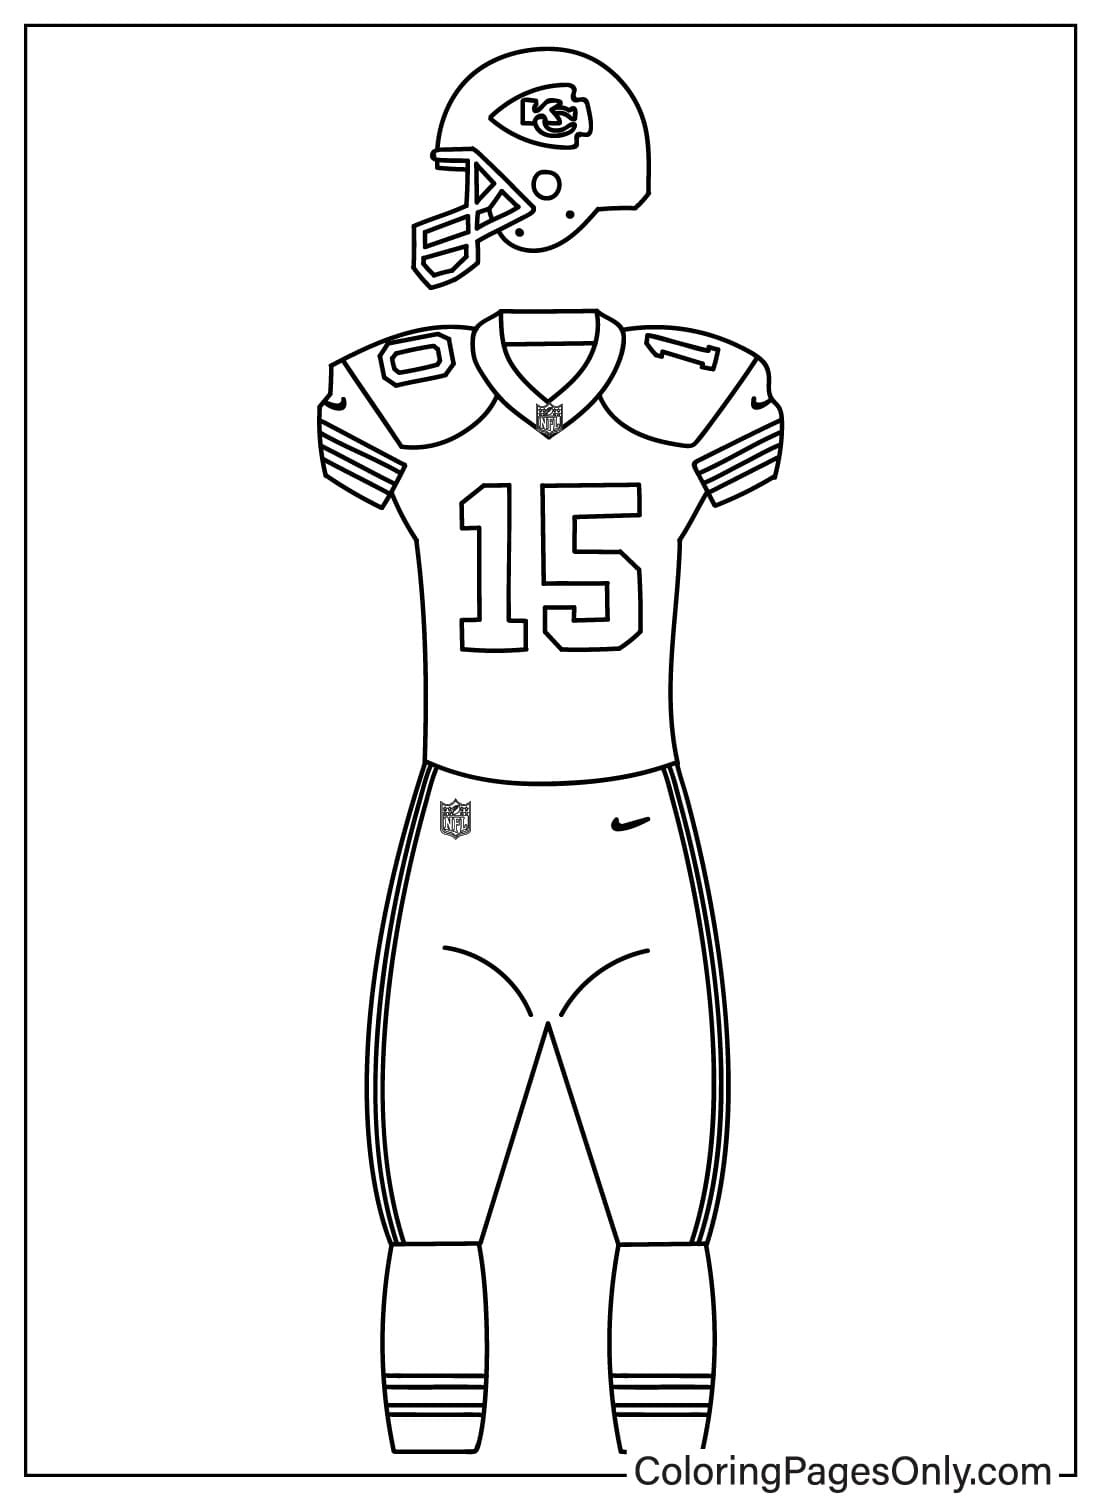 Uniform Kansas City Chiefs Coloring Page - Free Printable Coloring Pages